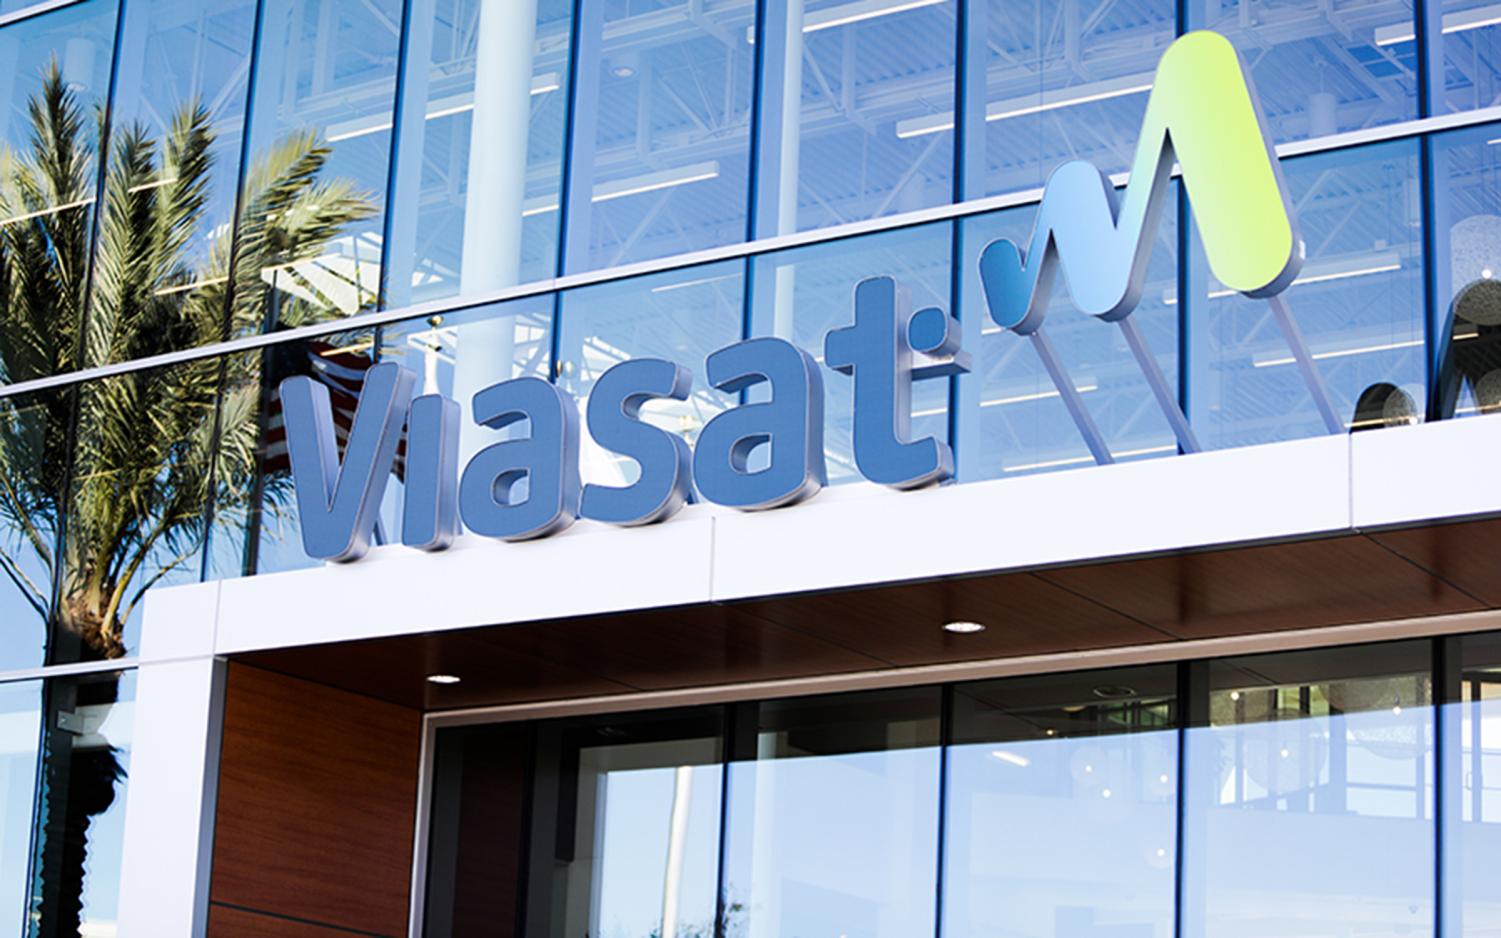 Viasat wireless internet system is added to Canadian airlines